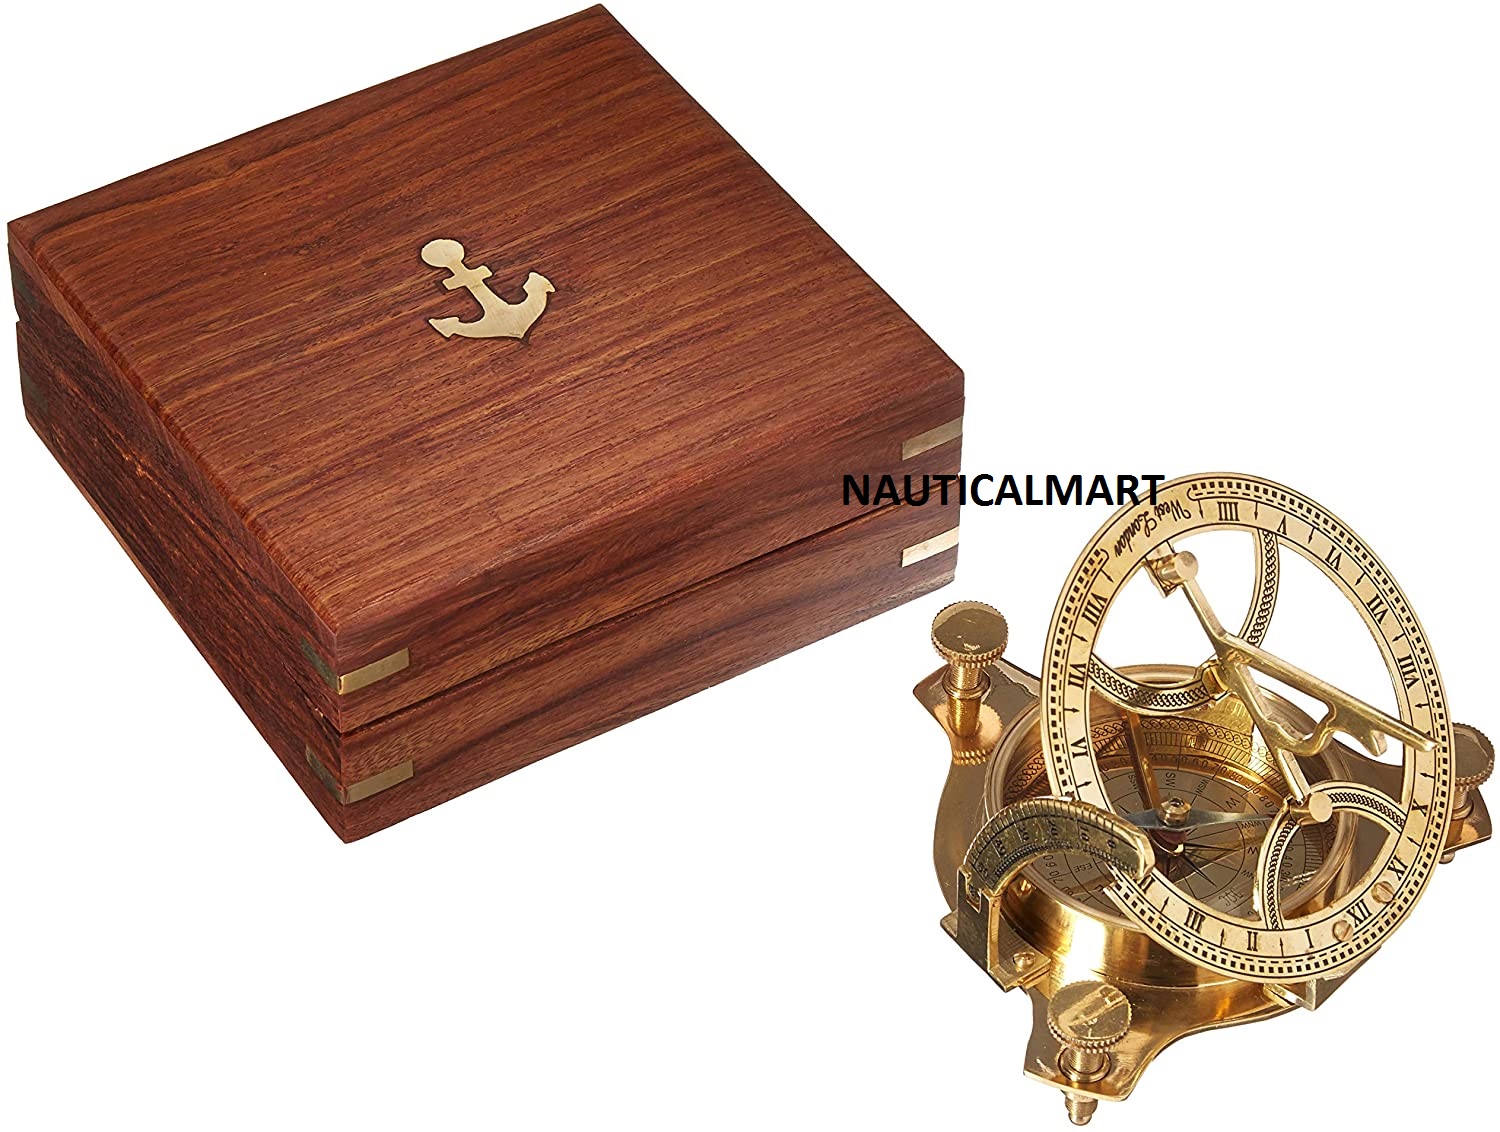 NauticalMart Solid Brass Round Sundial Compass with Design Rosewood Box - Brass - image 1 of 3